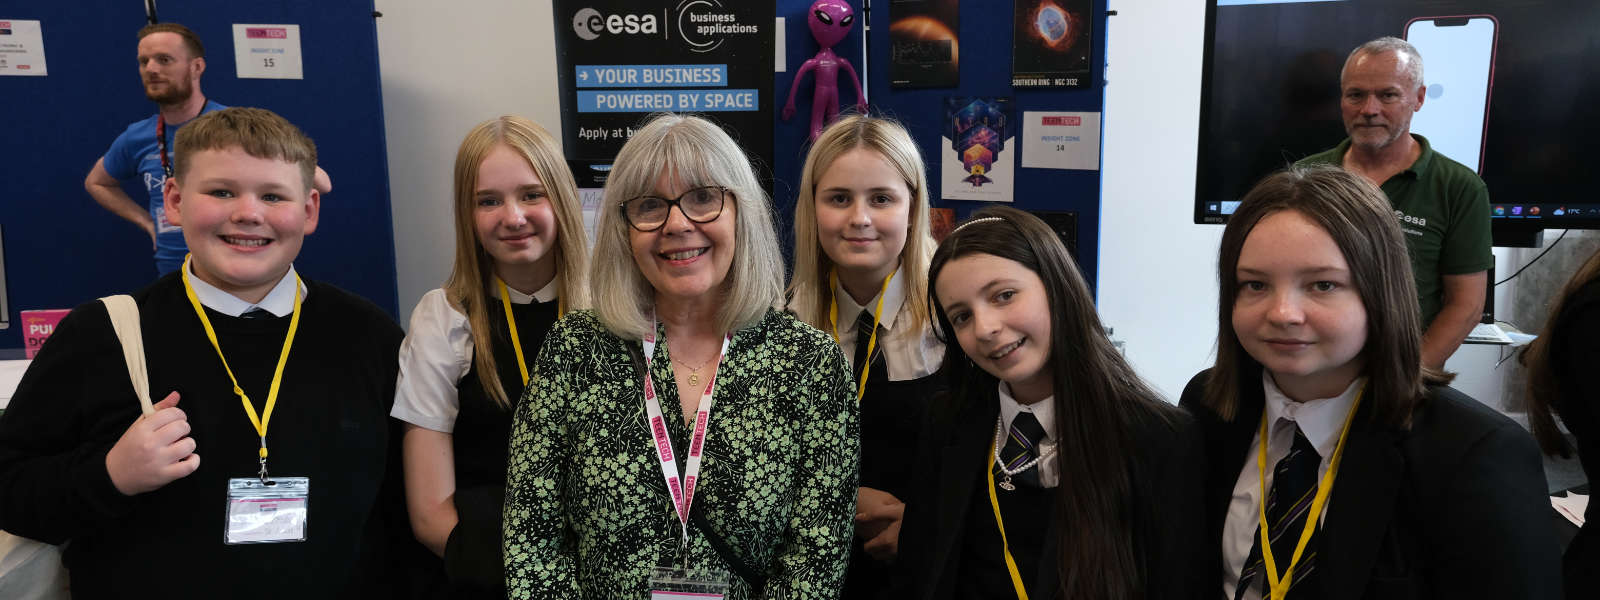 TeenTech founder Maggie Philbin with pupils at the TeenTech Festival at the University of Strathclyde